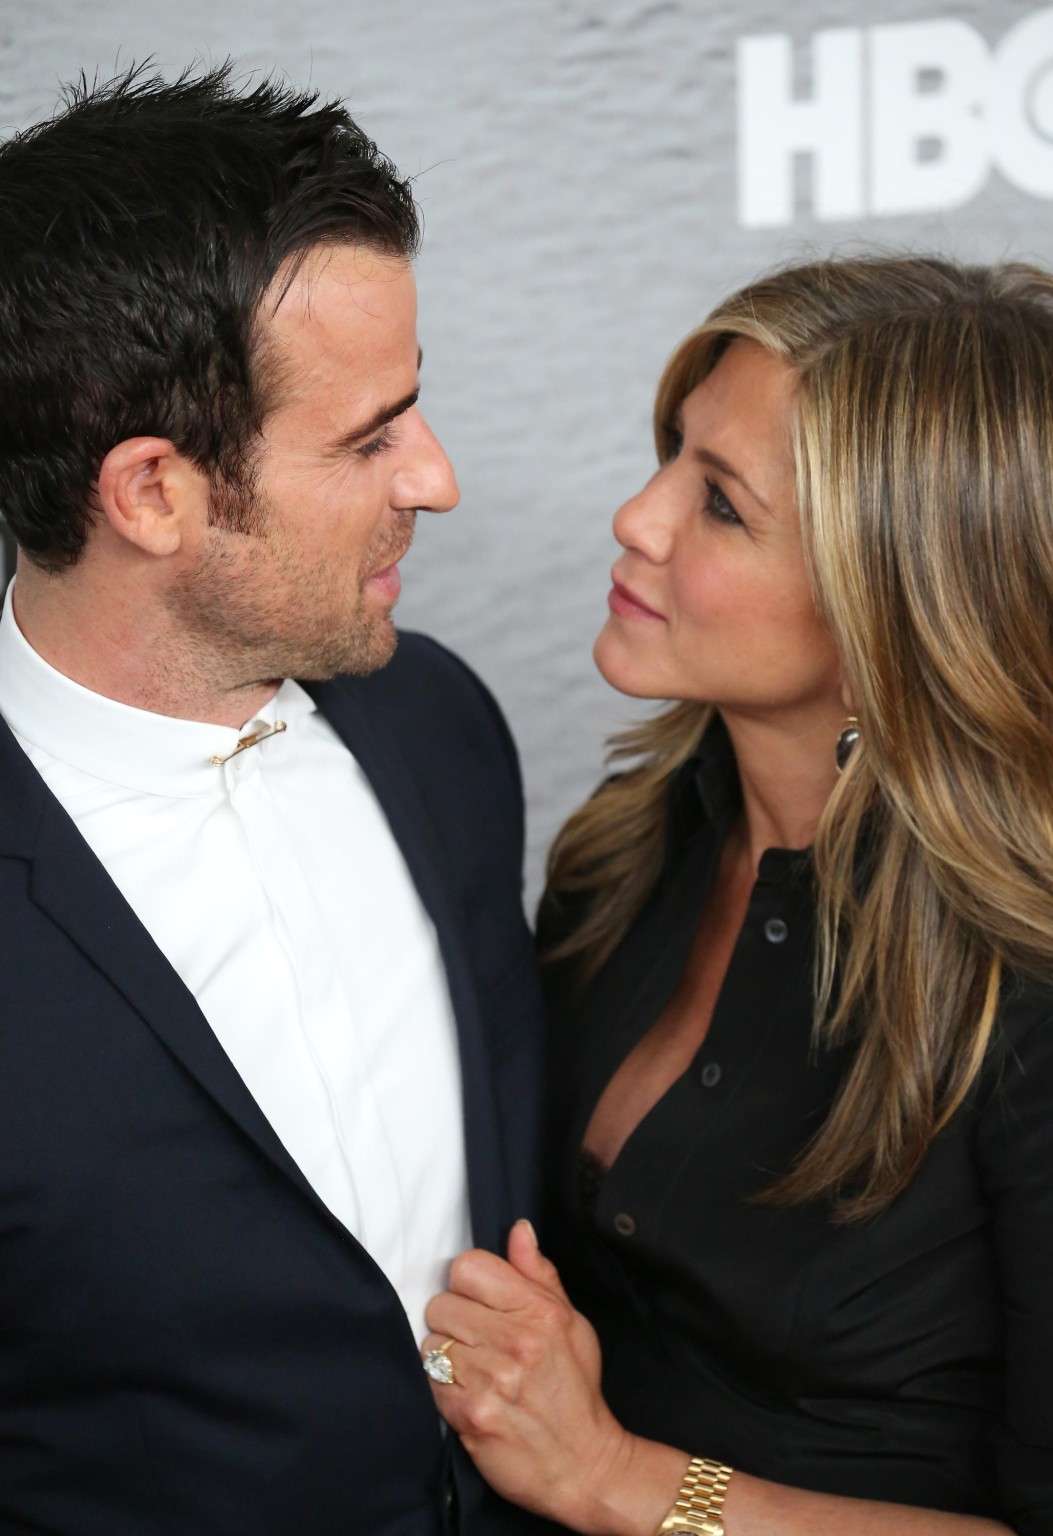 Jennifer Aniston cleavy and bra peek at The Leftovers premiere in NYC #75193017